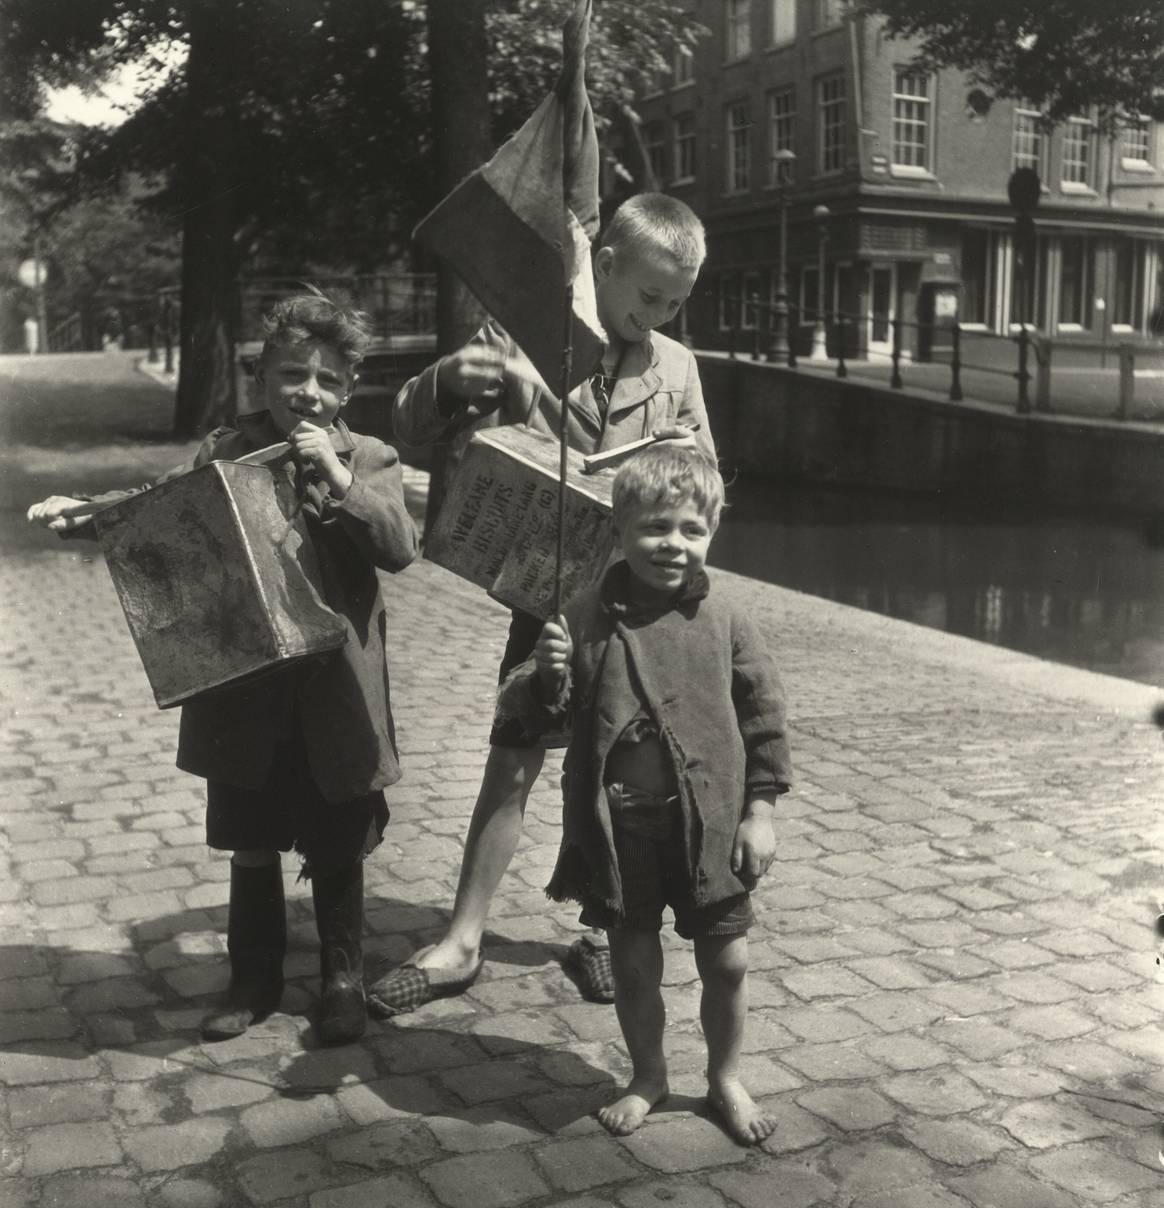 Artwork by Emmy Andriesse, 4 works: Three Amsterdam boys parading with their selfmade drums, Made of Gelatin silverprint